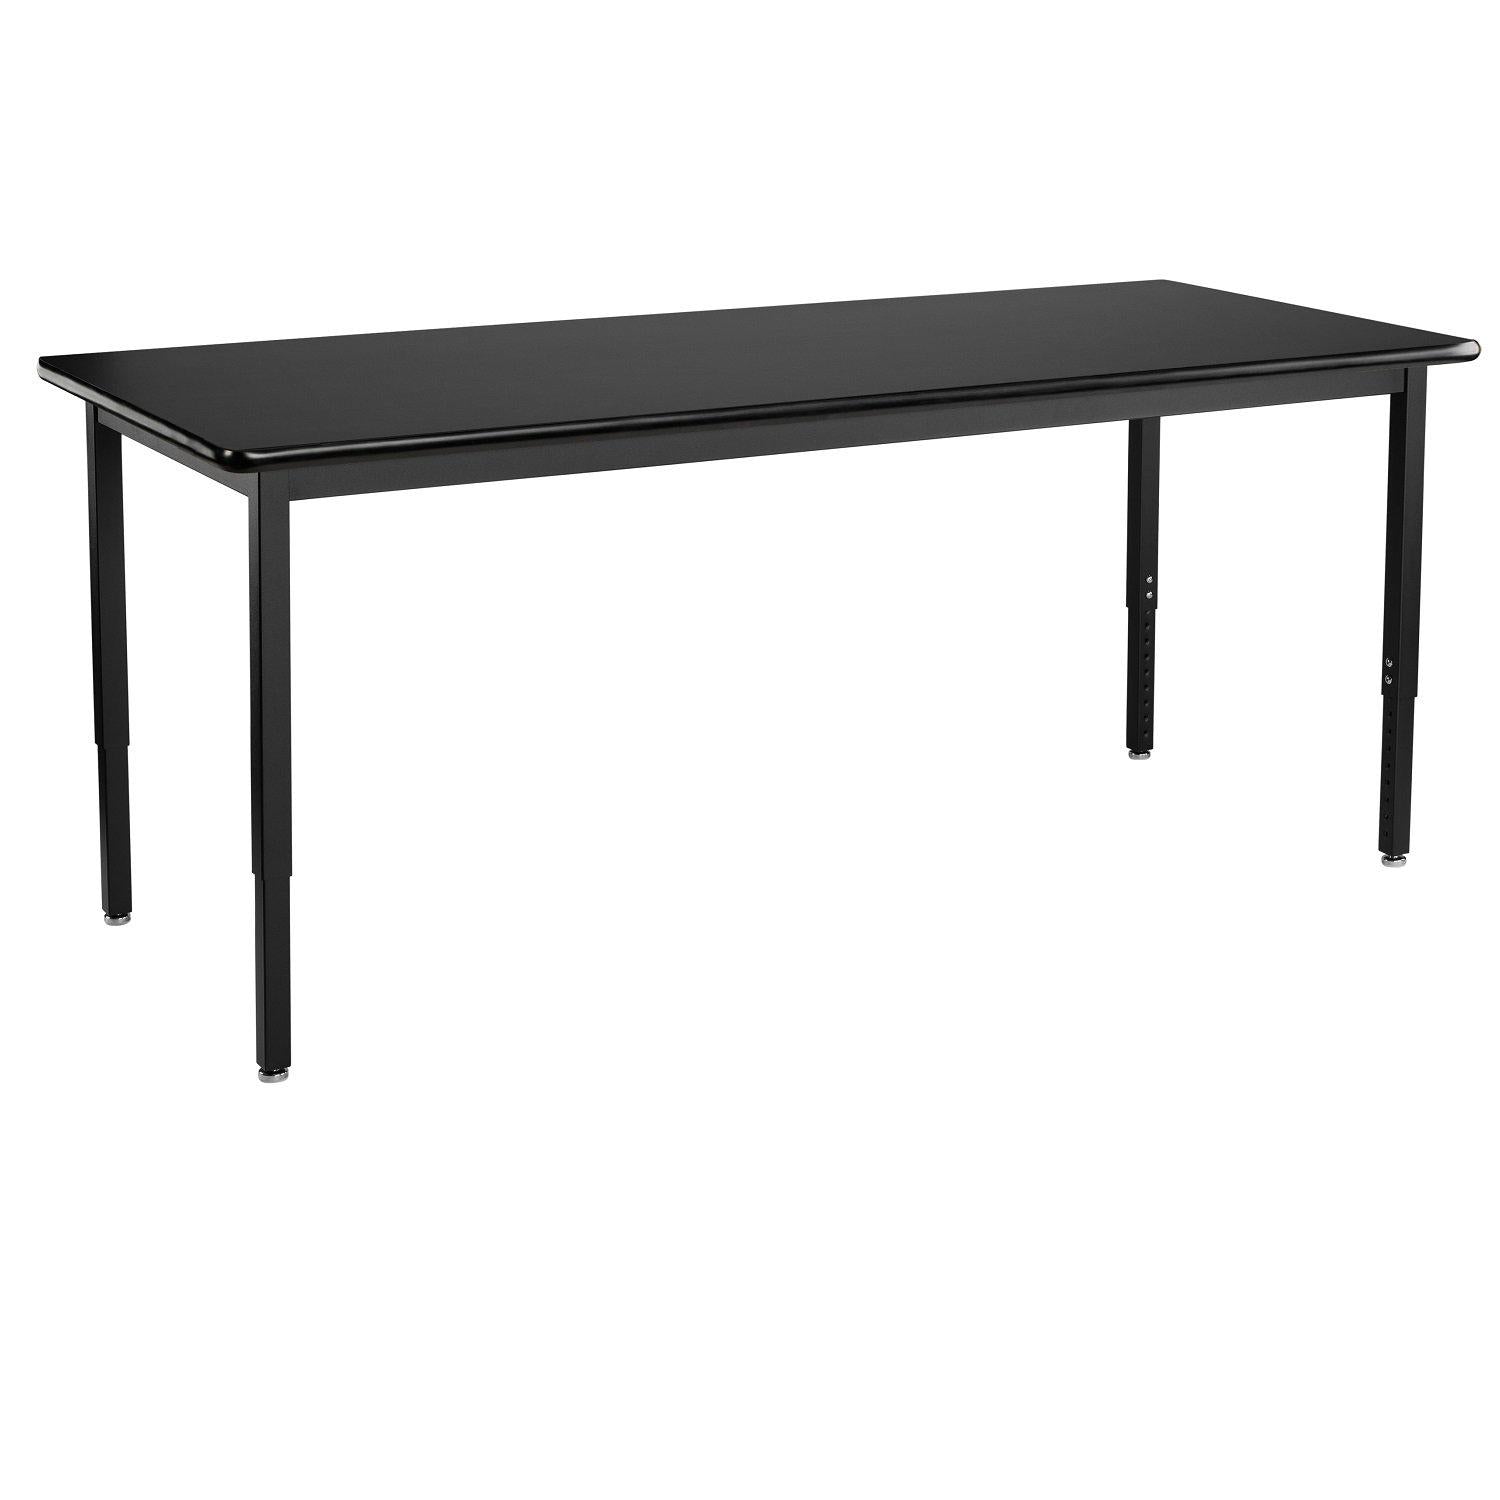 Heavy-Duty Height-Adjustable Utility Table, Black Frame, 24" x 96", High-Pressure Laminate Top with T-Mold Edge